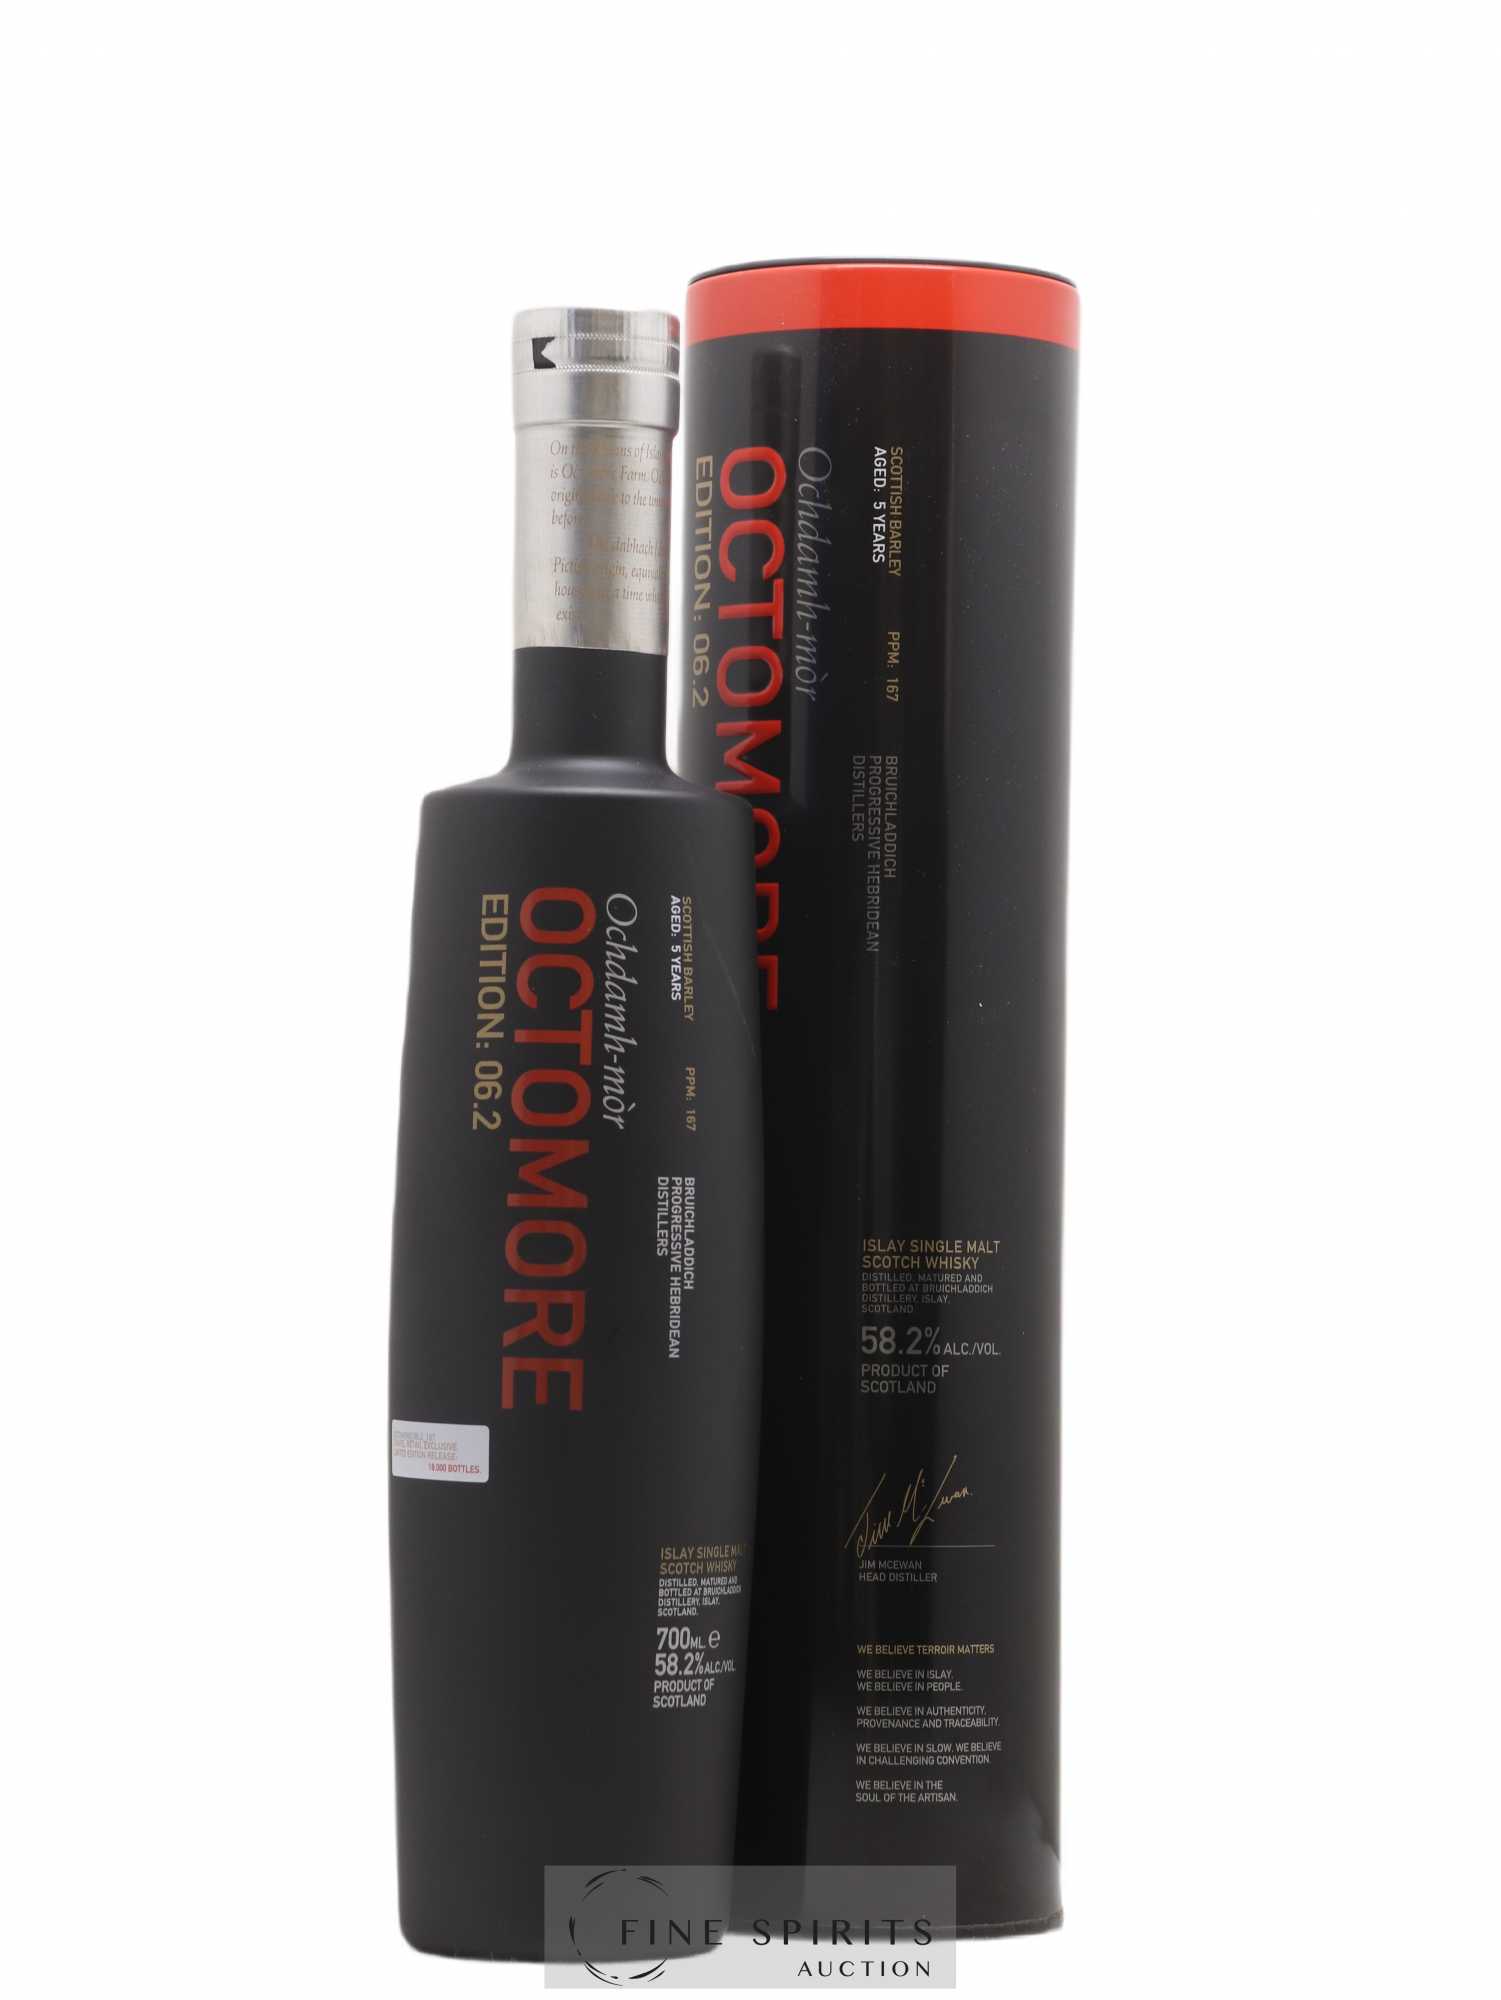 Octomore 5 years Of. Edition 06.2 Scottish Barley - One of 18000 Limited Edition 